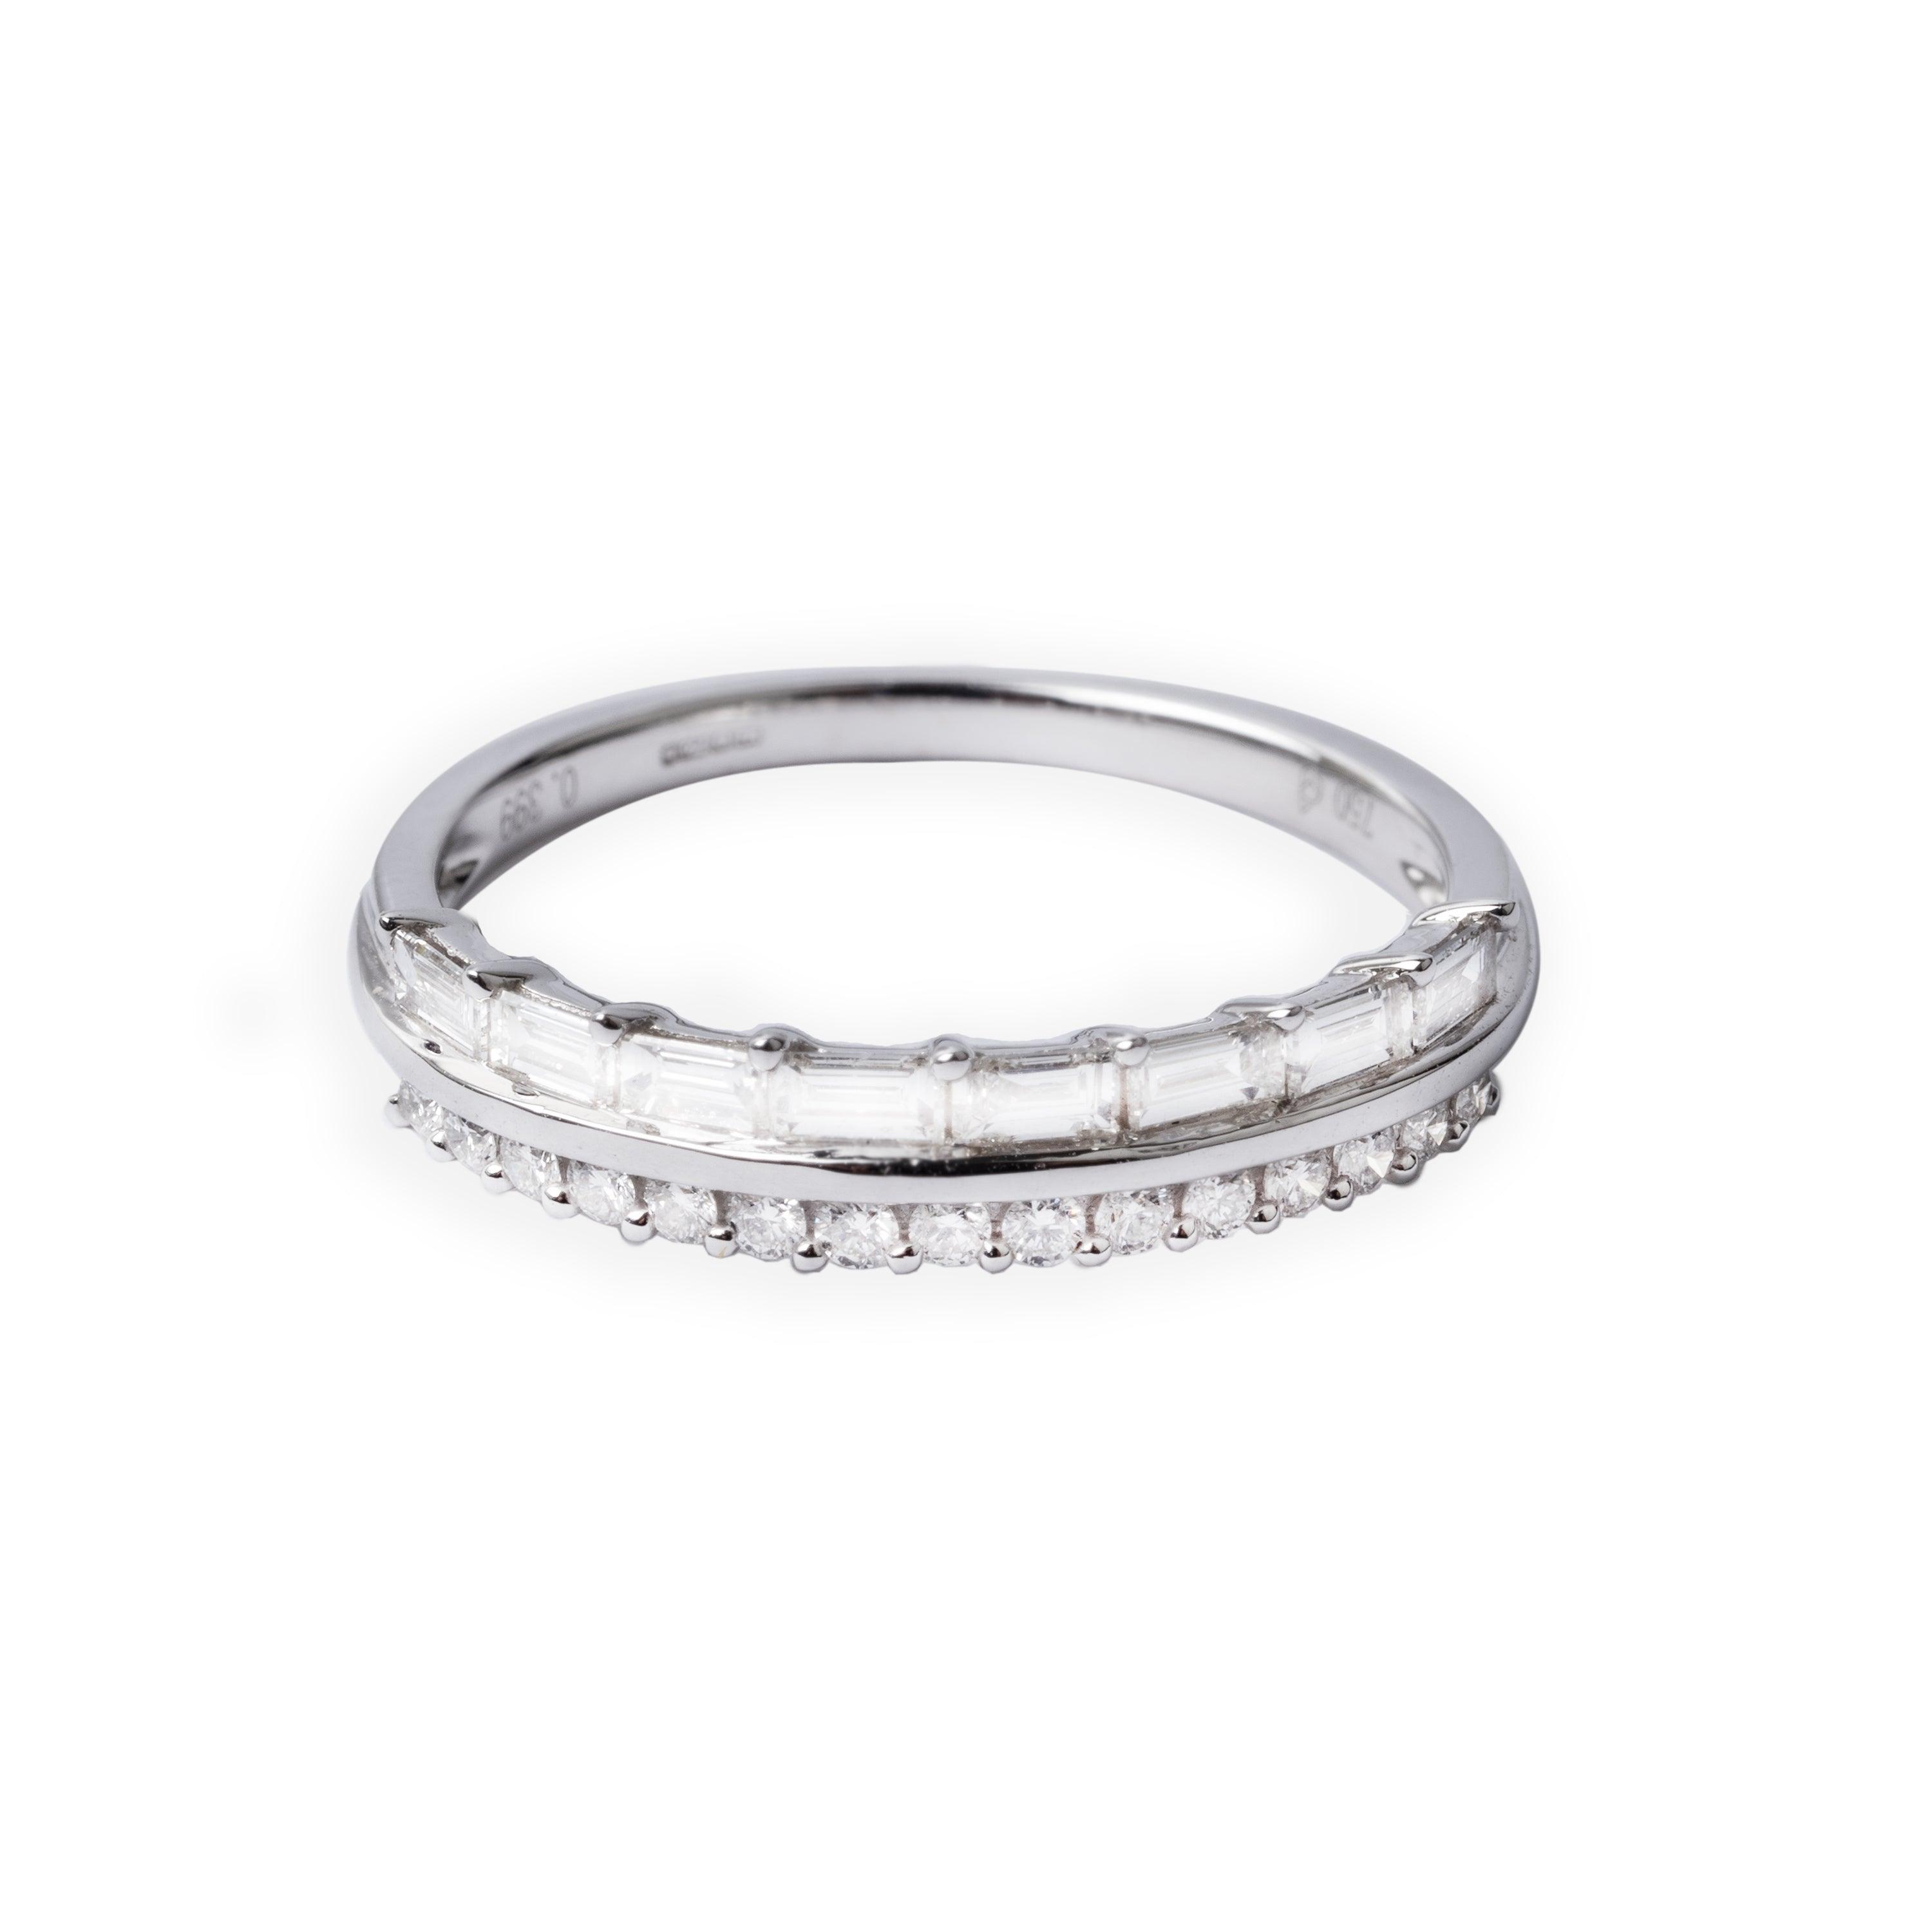 18ct White Gold Diamond Eternity Ring with Round & Baguette Cut Diamonds AR45615-7 - Minar Jewellers